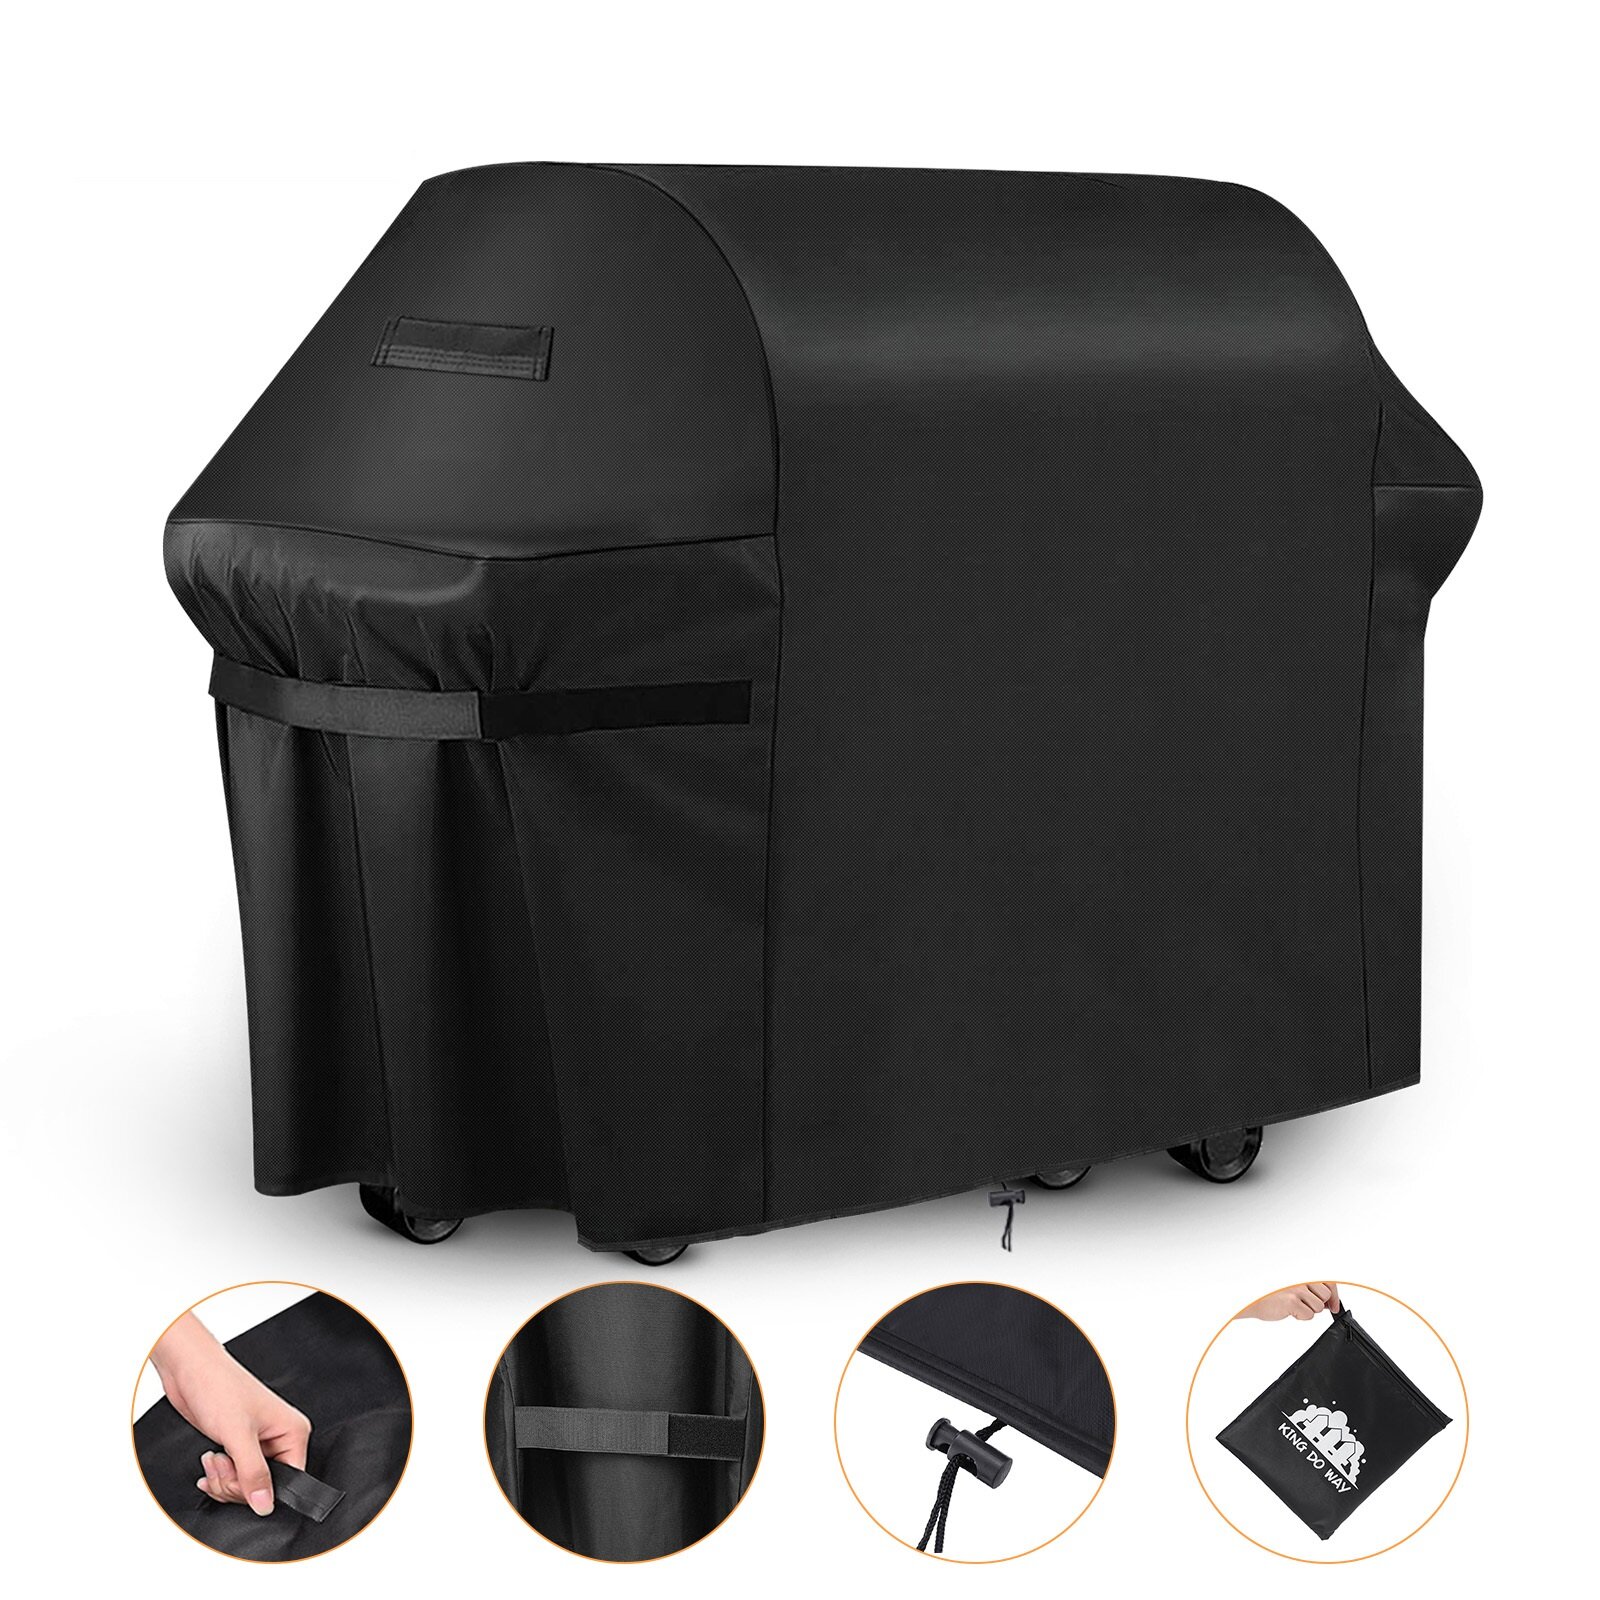 KING DO WAY 210D Oxford Black BBQ Cover Waterproof Fade-resistance UV-protection Grill Cover